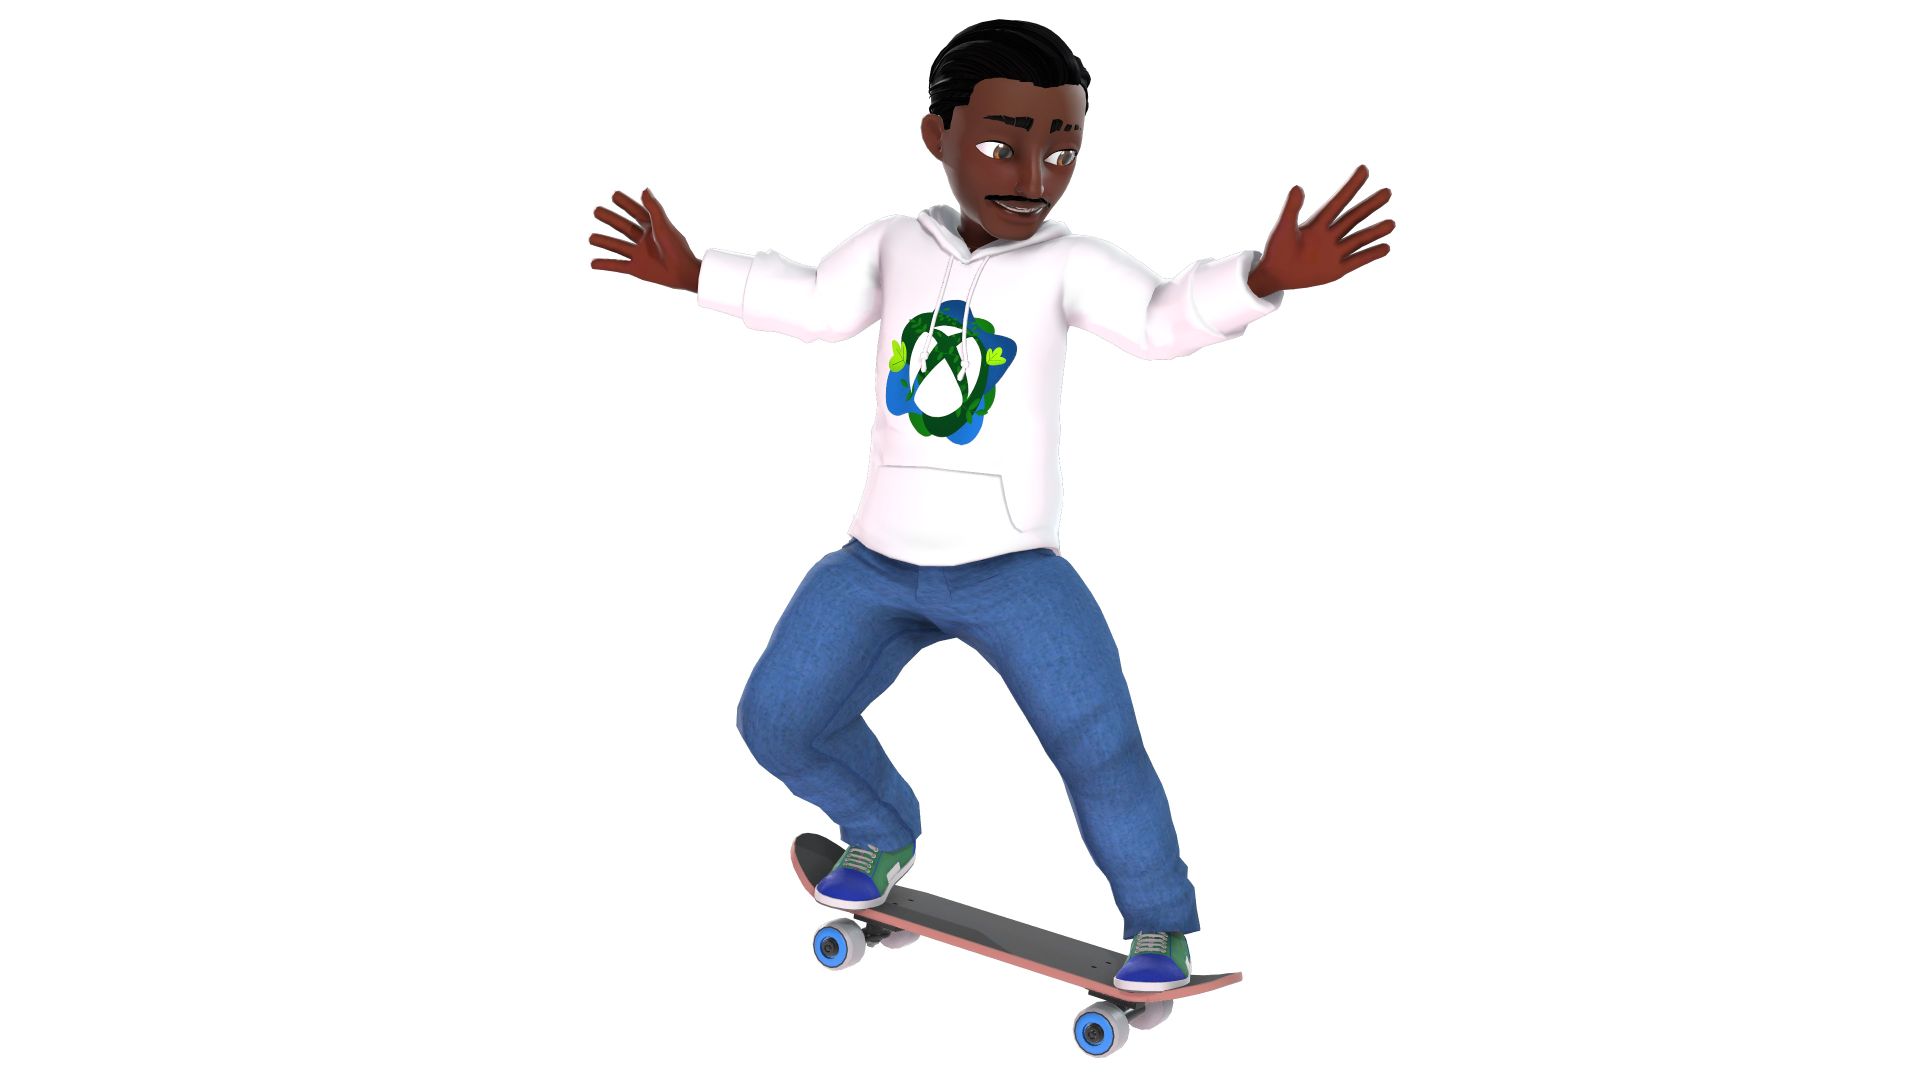 An Xbox avatar wearing a white hooded sweatshirt with the Xbox sustainability logo on the front and jeans while riding a skateboard.